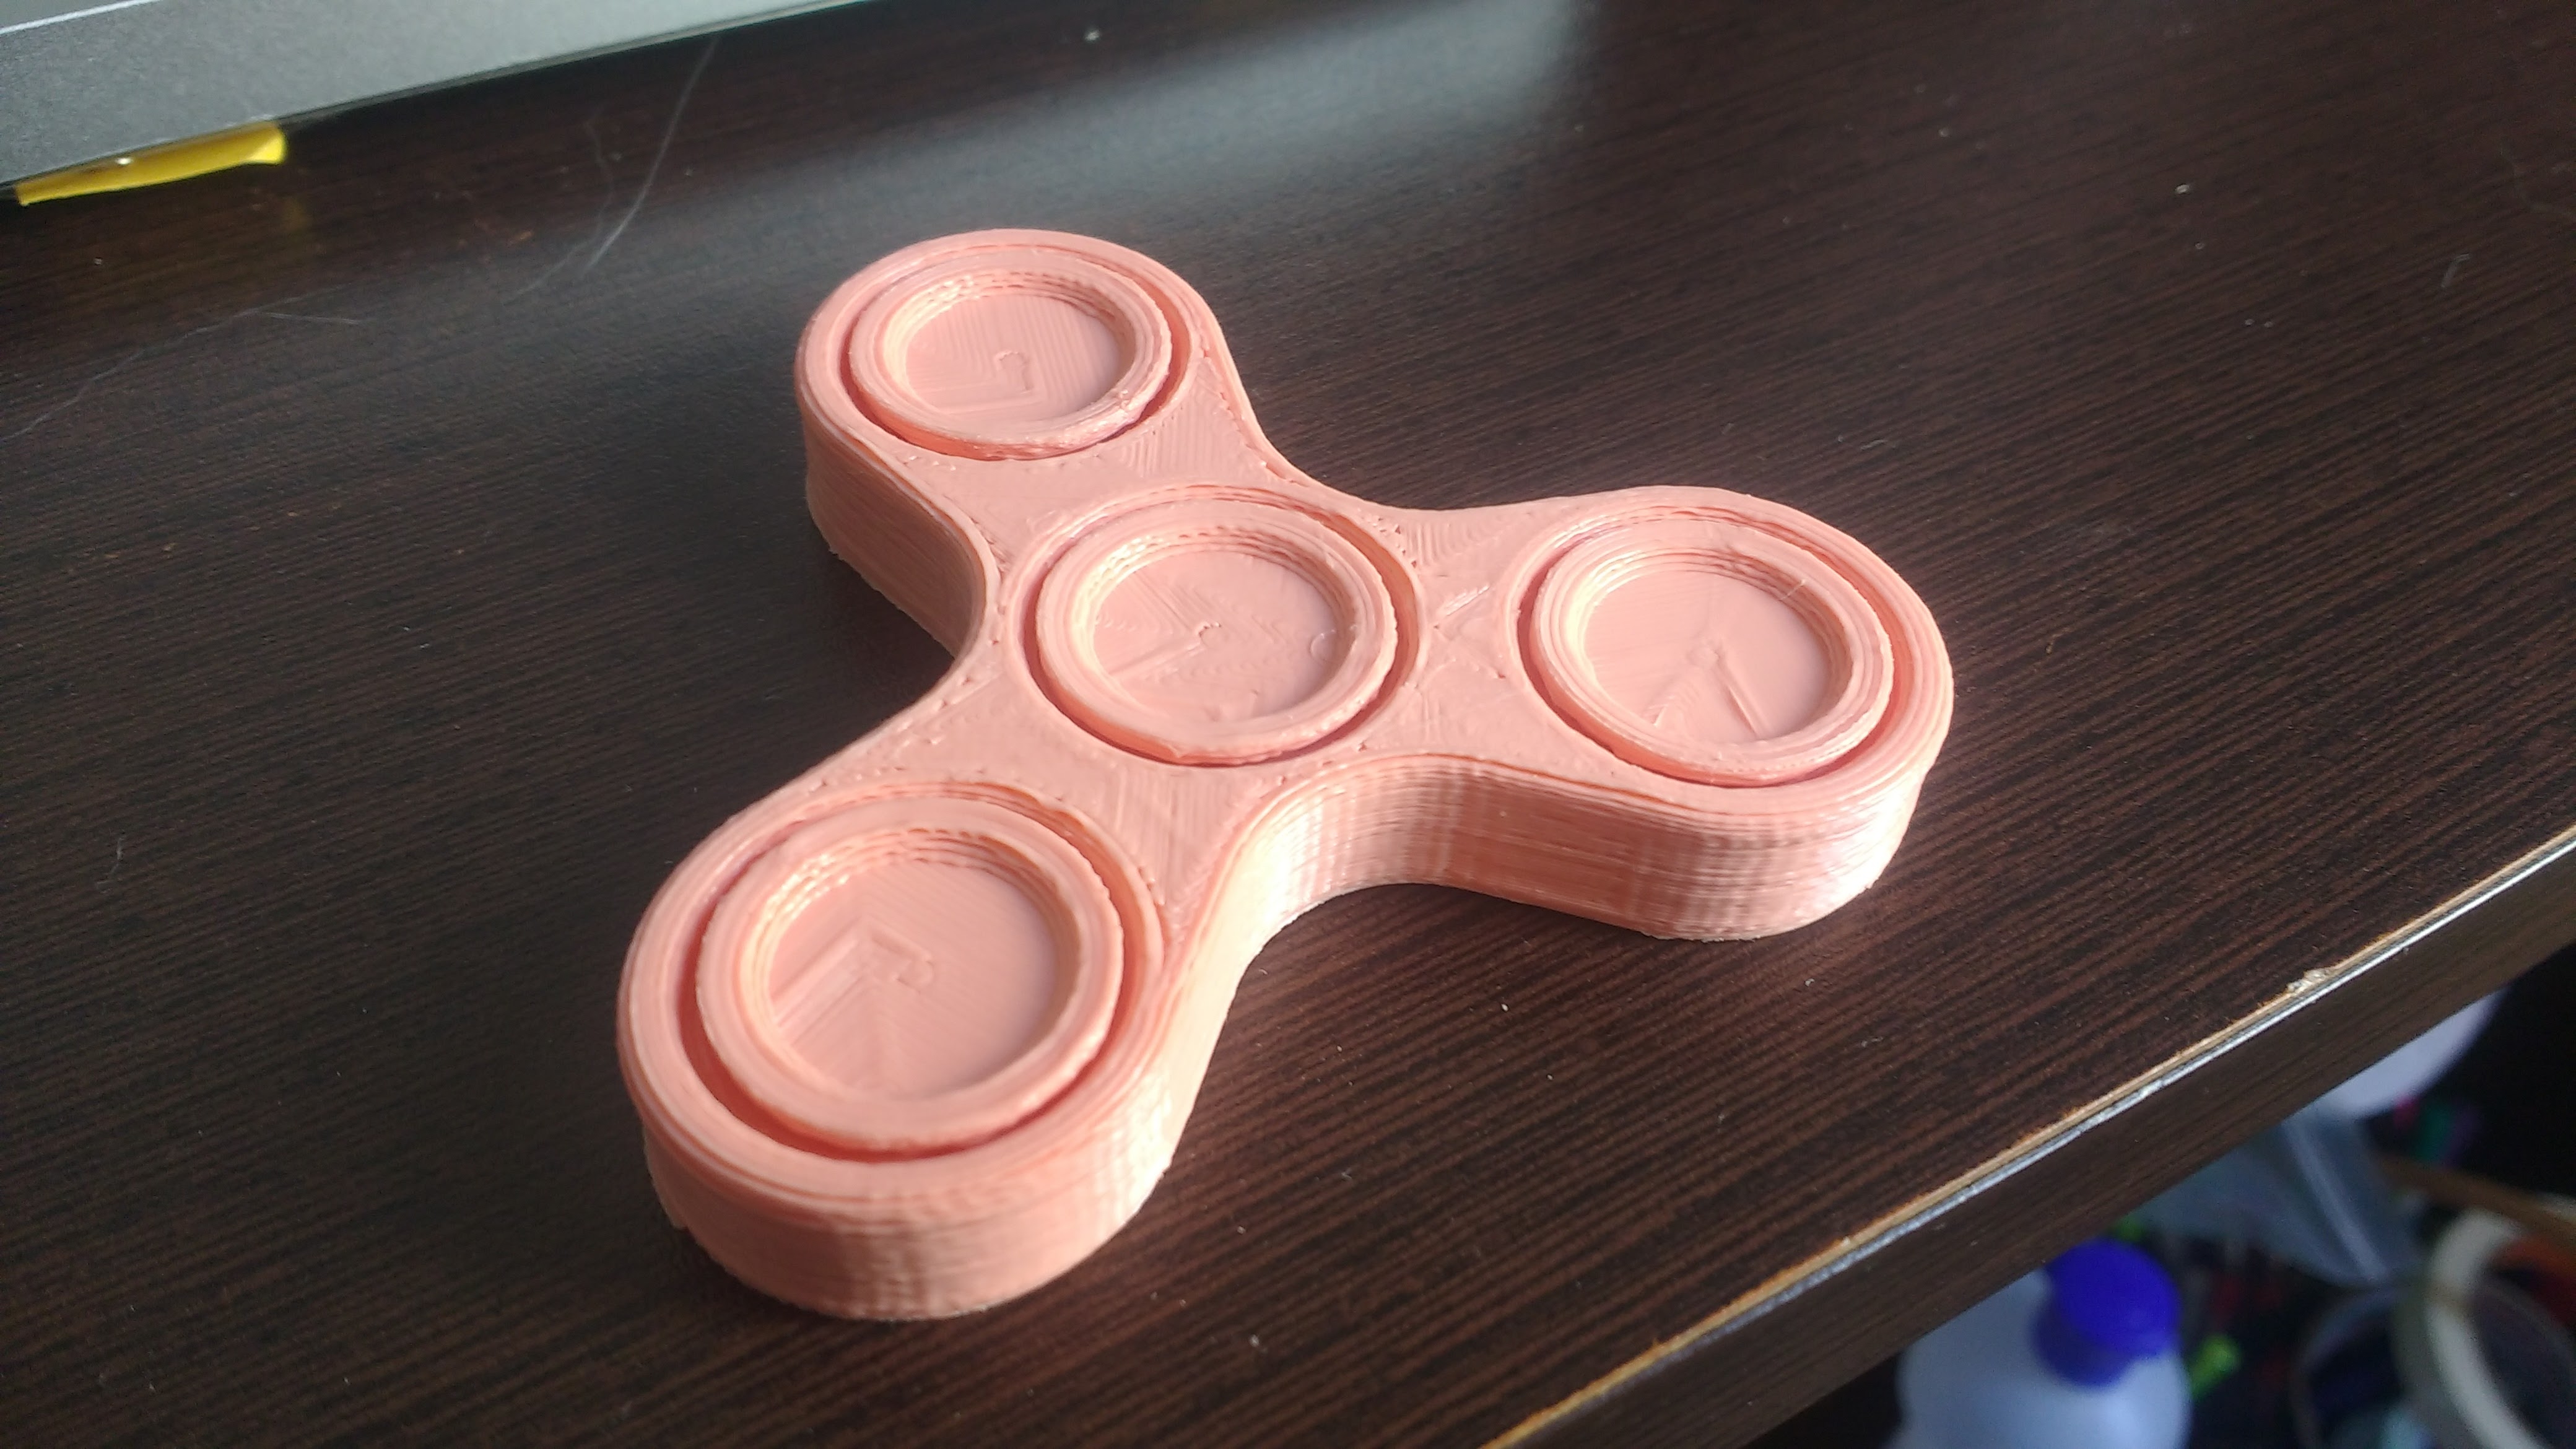 3D Printable Fidget Spinner OnePiecePrint / No Bearings Required! by Muzz64